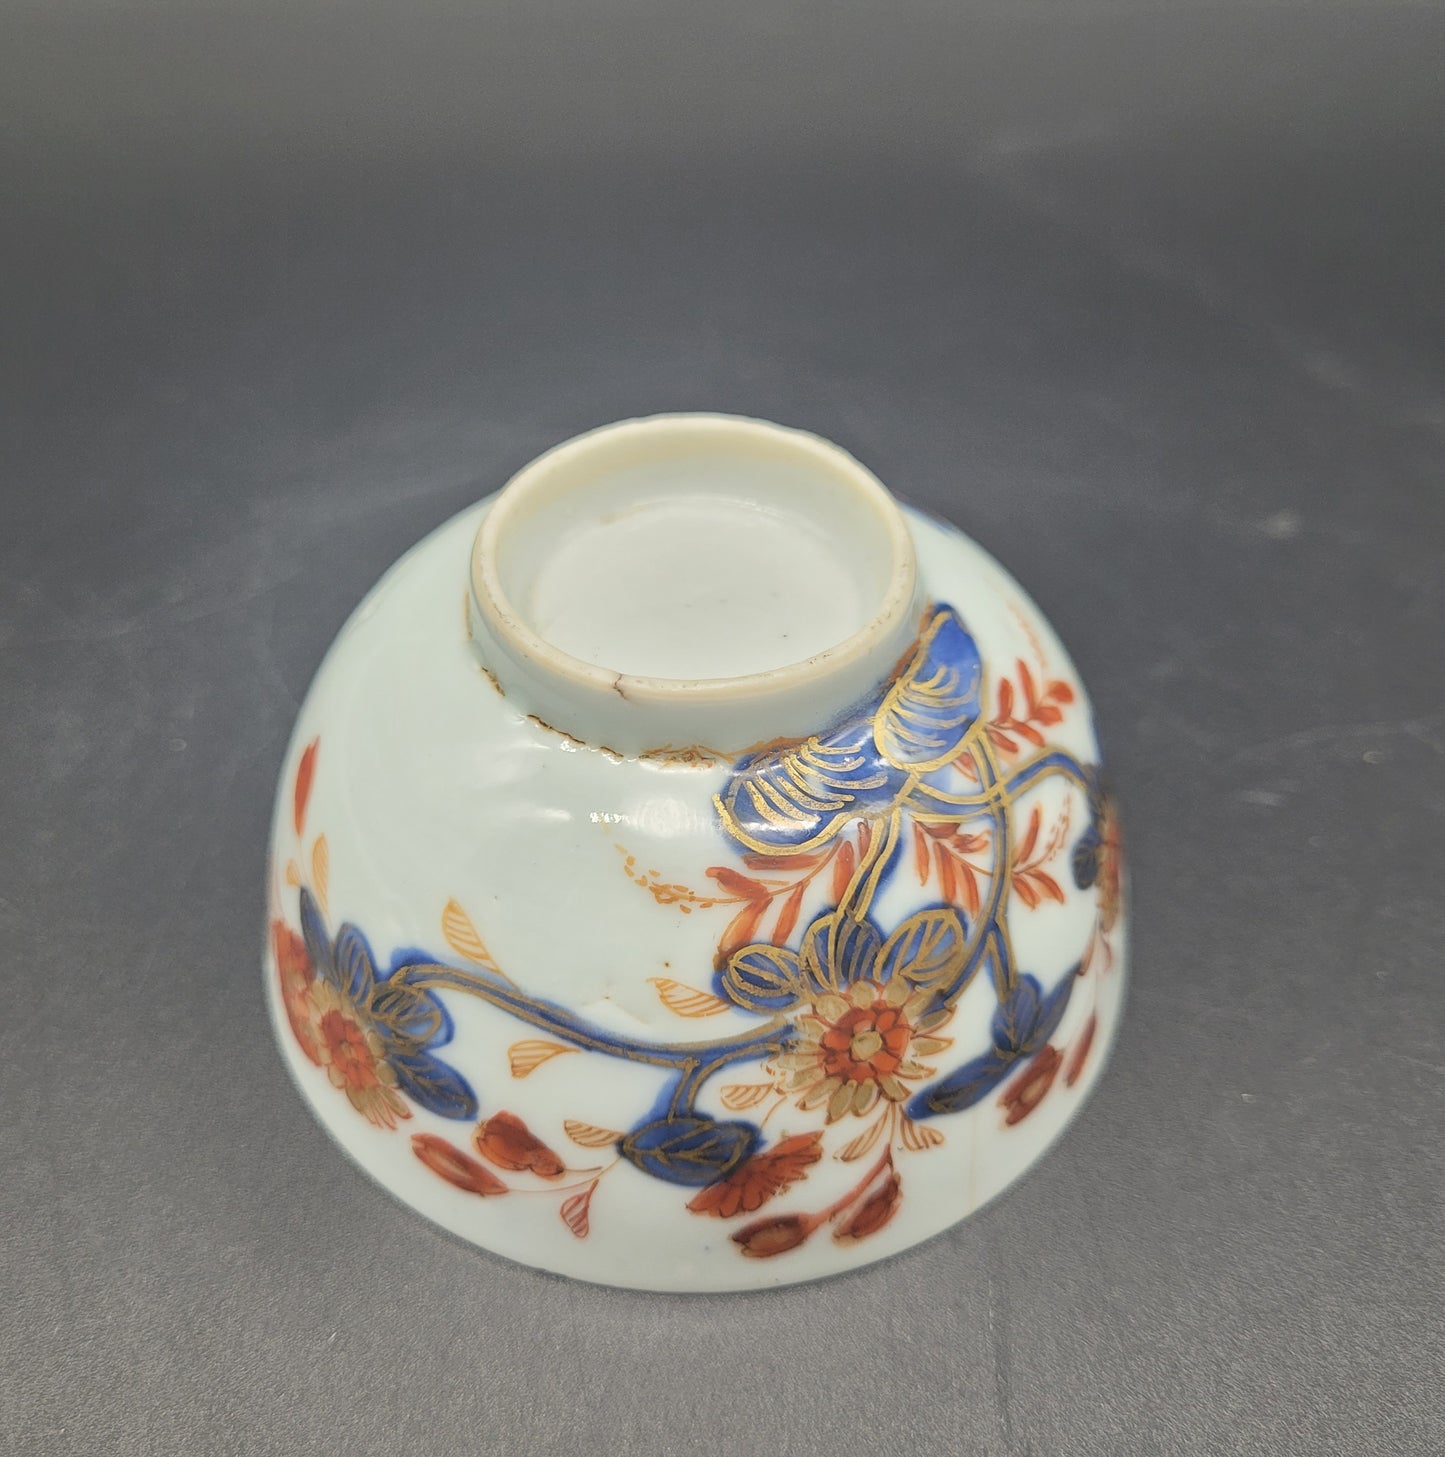 Chinese Antique Tea Bowls and Saucer Plate 18 / 19th Century Imari